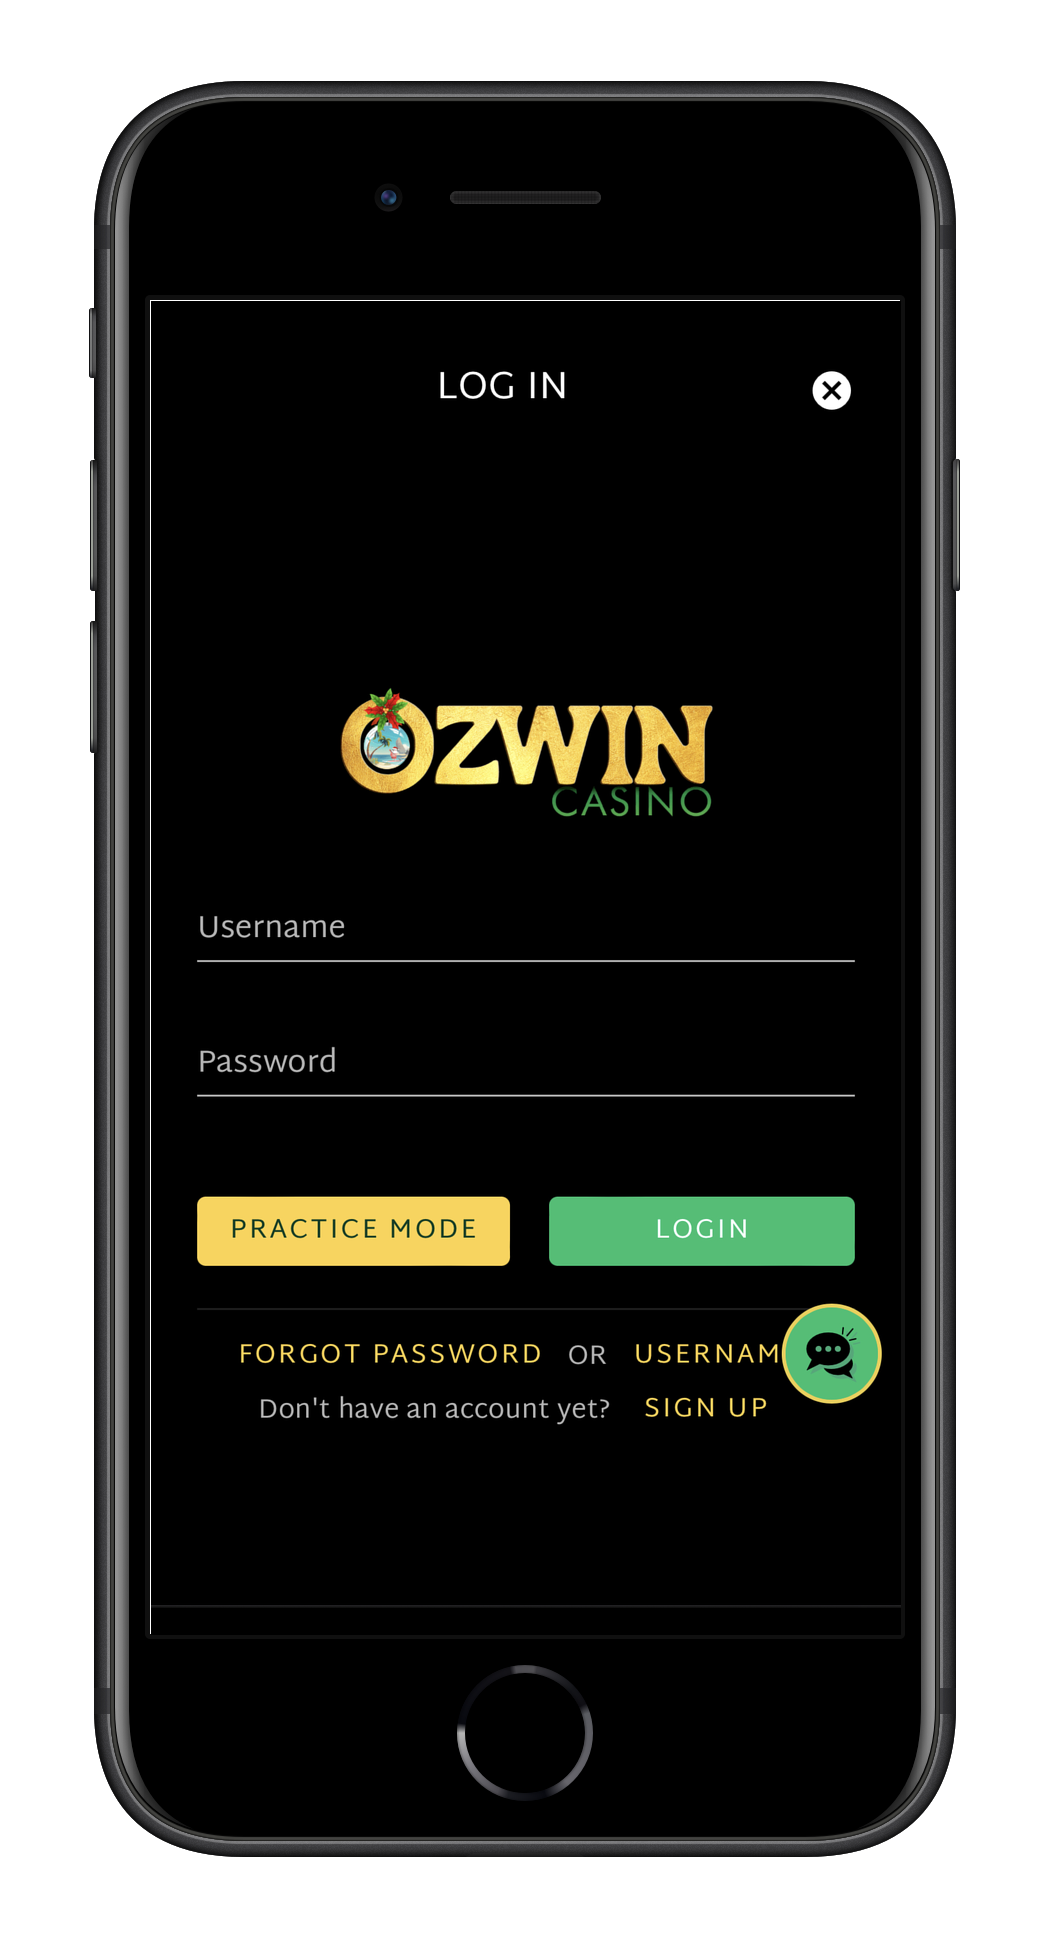 Do Ozwin casino login and get all exclusive bonuses provide players the opportunity to play for free without a first cash deposit?